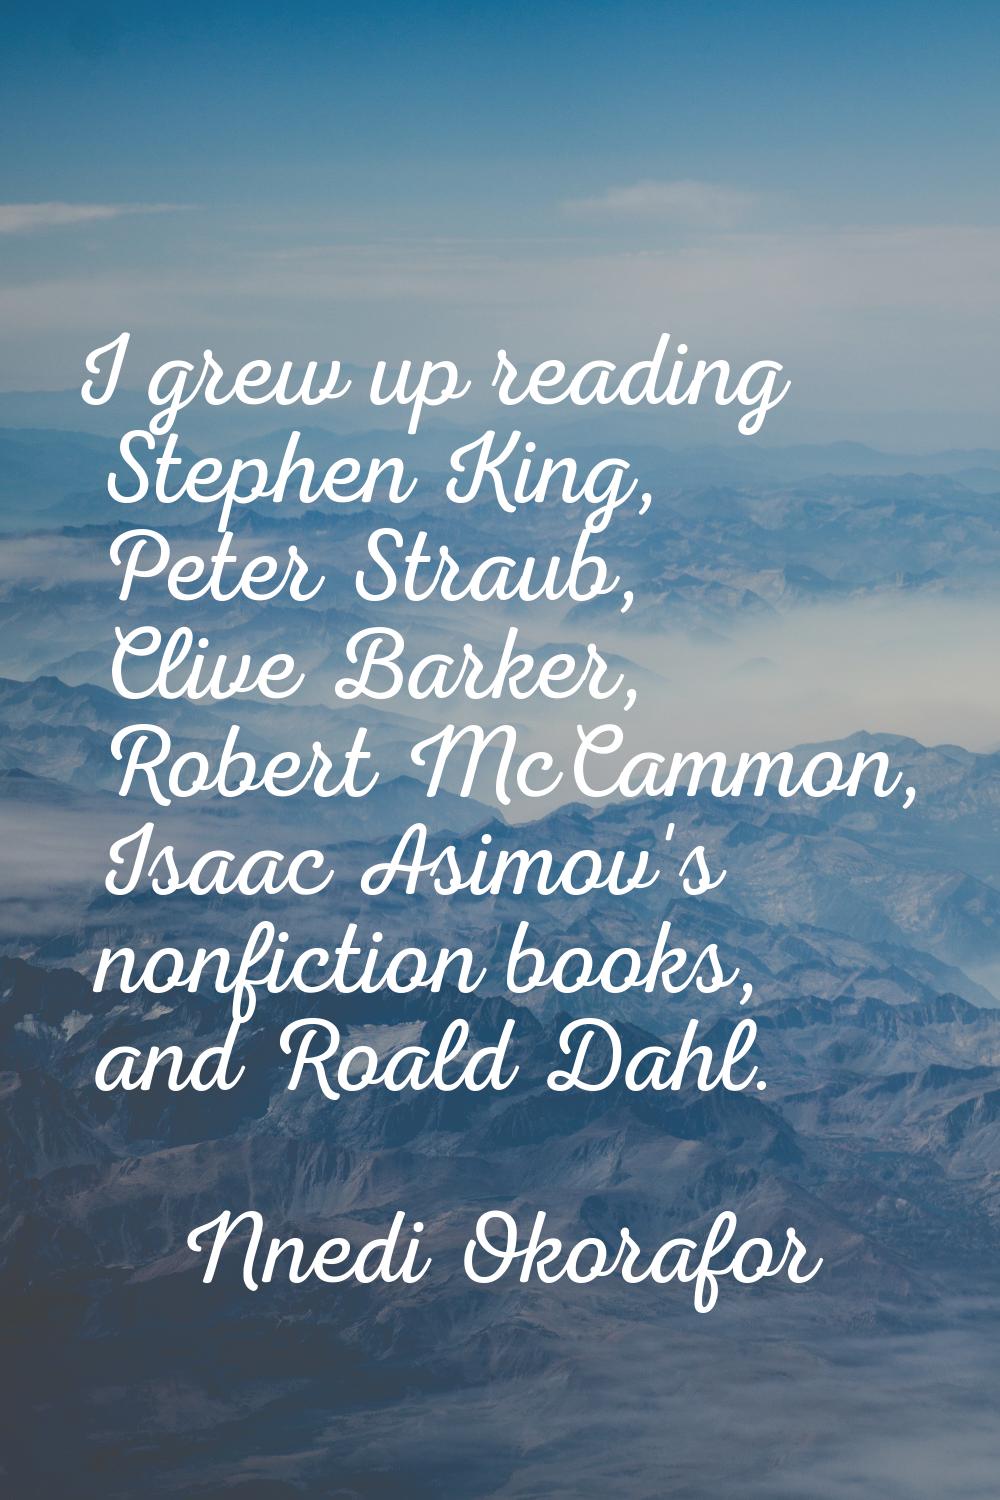 I grew up reading Stephen King, Peter Straub, Clive Barker, Robert McCammon, Isaac Asimov's nonfict